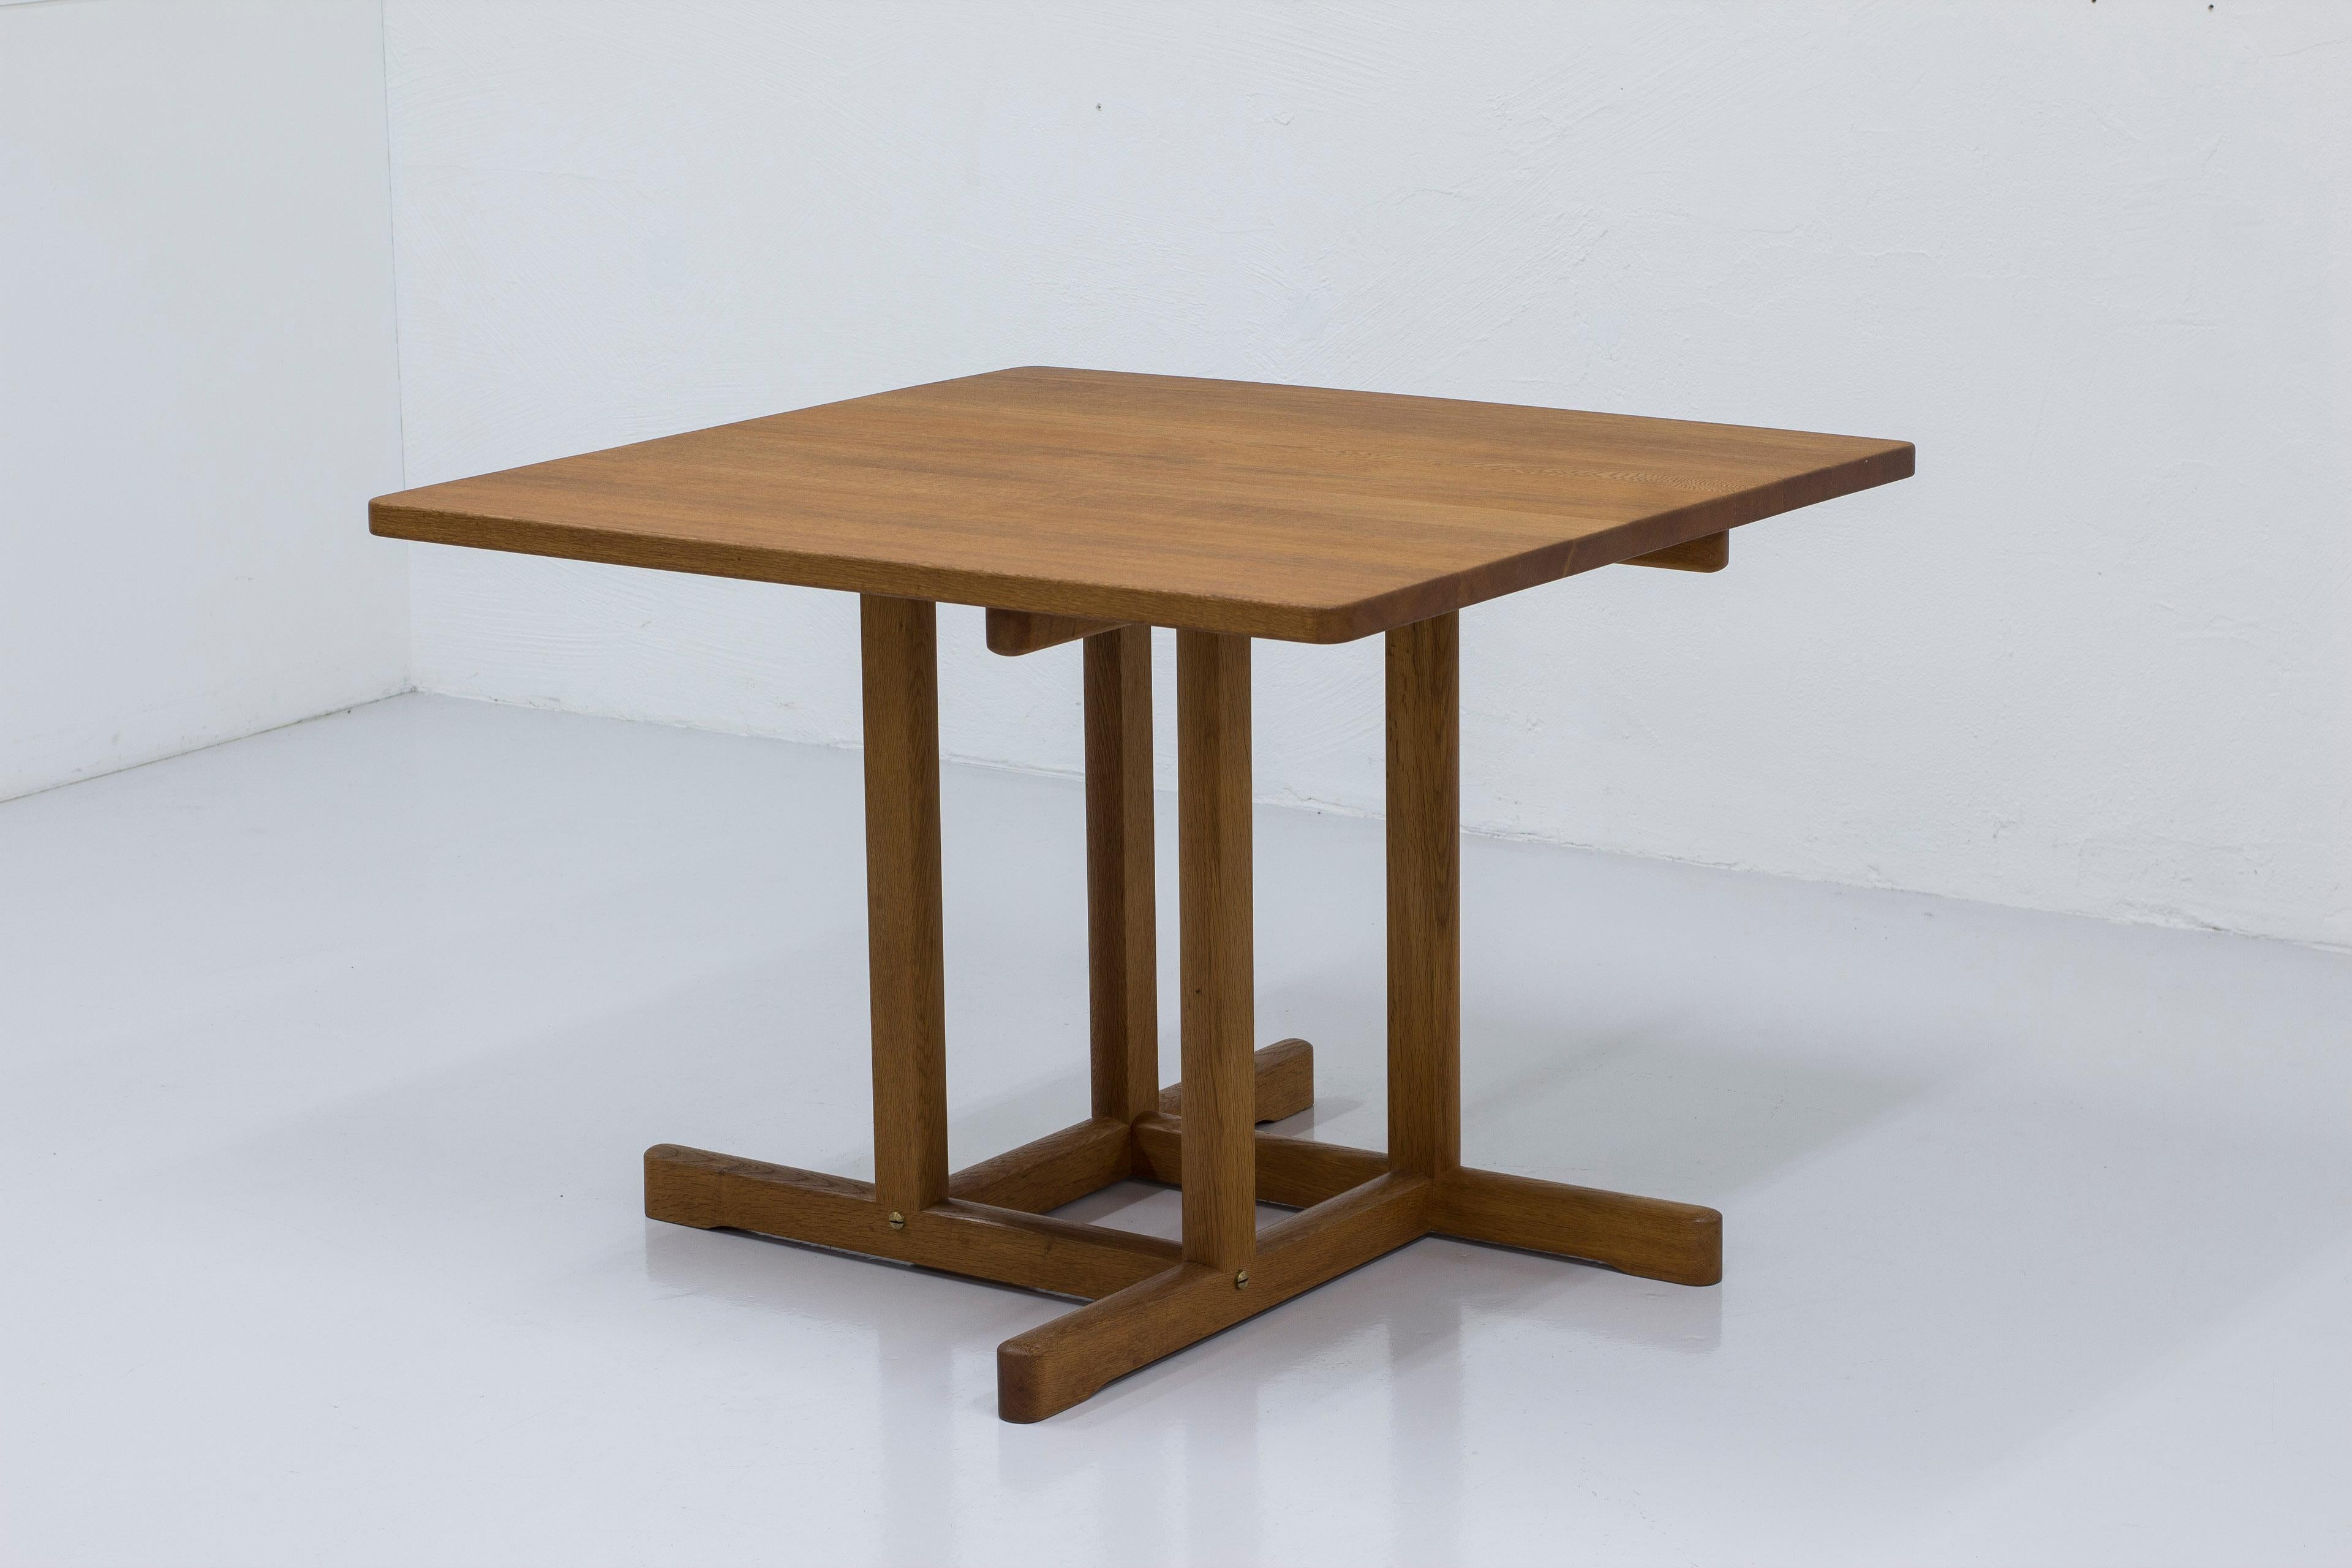 Dining table model 6288 designed by Børge Mogensen. Produced in Denmark by Fredericia Stolefabrik during the late 1950s-1960s. Made from solid oak. Very good vintage condition with light signs of age related wear and patina. 

Børge Mogensen